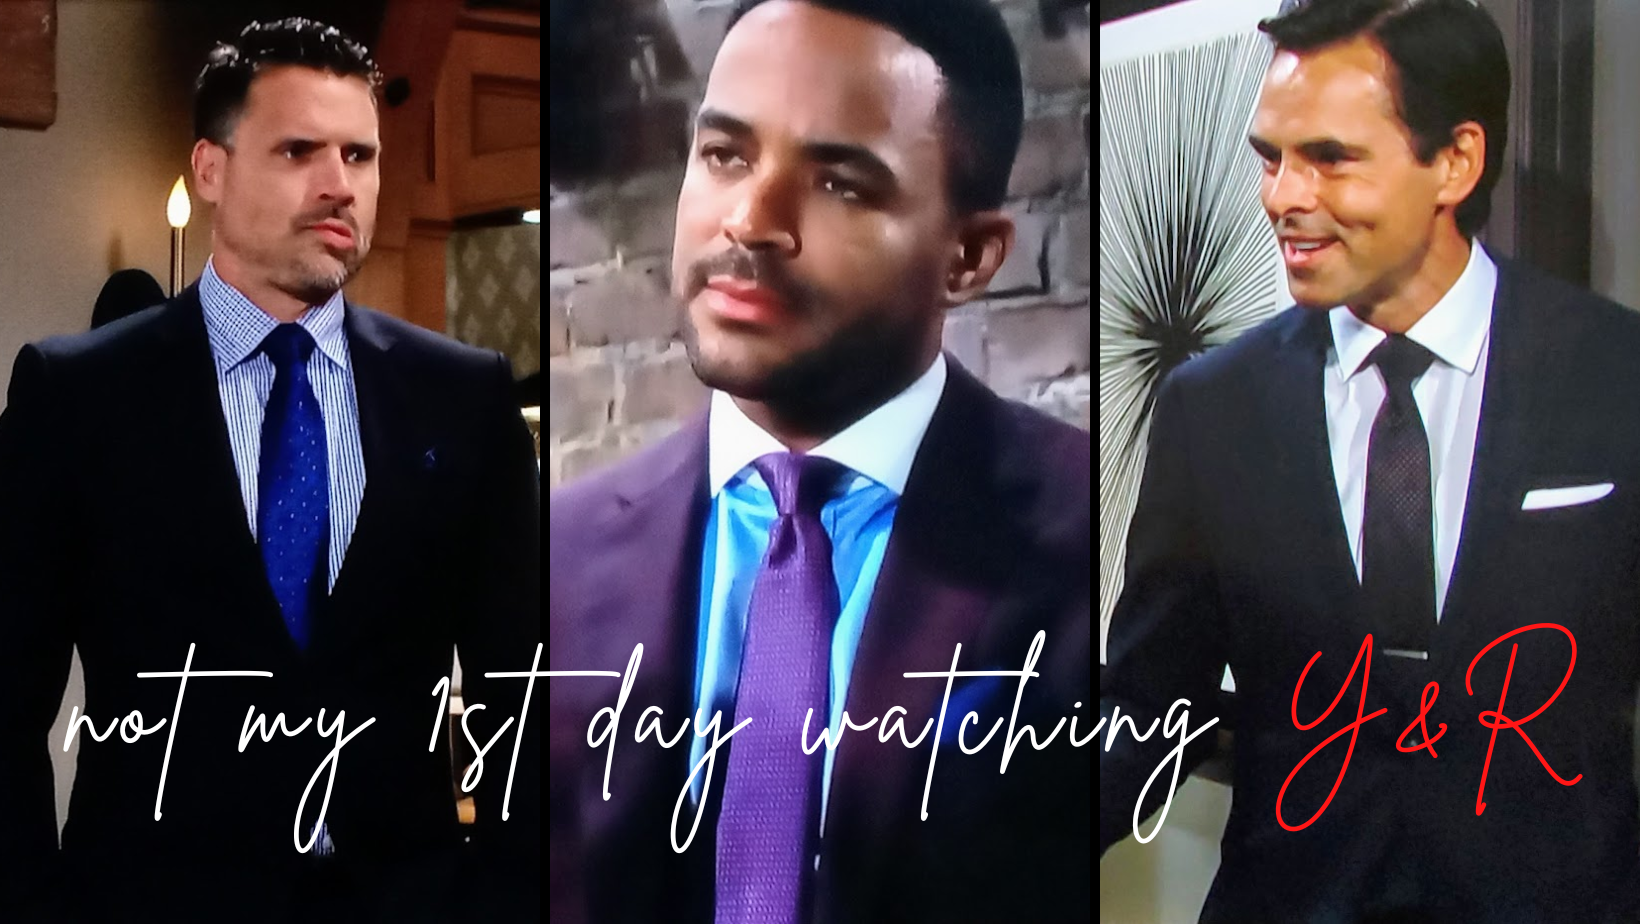 Nick Newman, Nate Hastings, & Billy Abbott, COOs in suits on Y&R